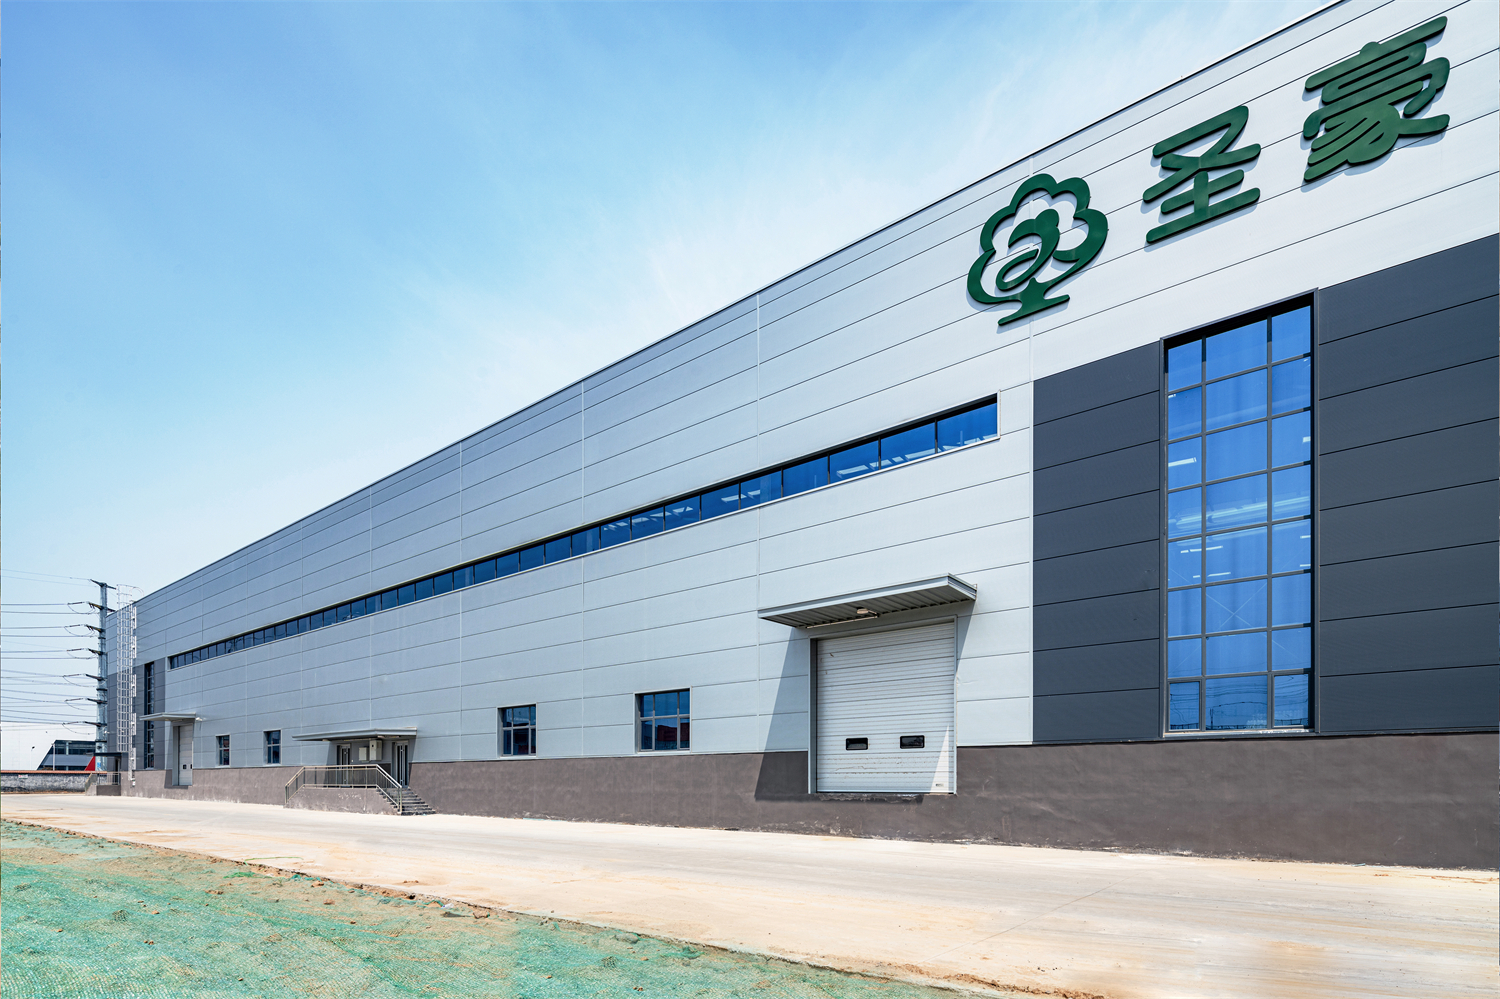 With equal emphasis on function and beauty, green building materials help the construction of logistics center(图6)